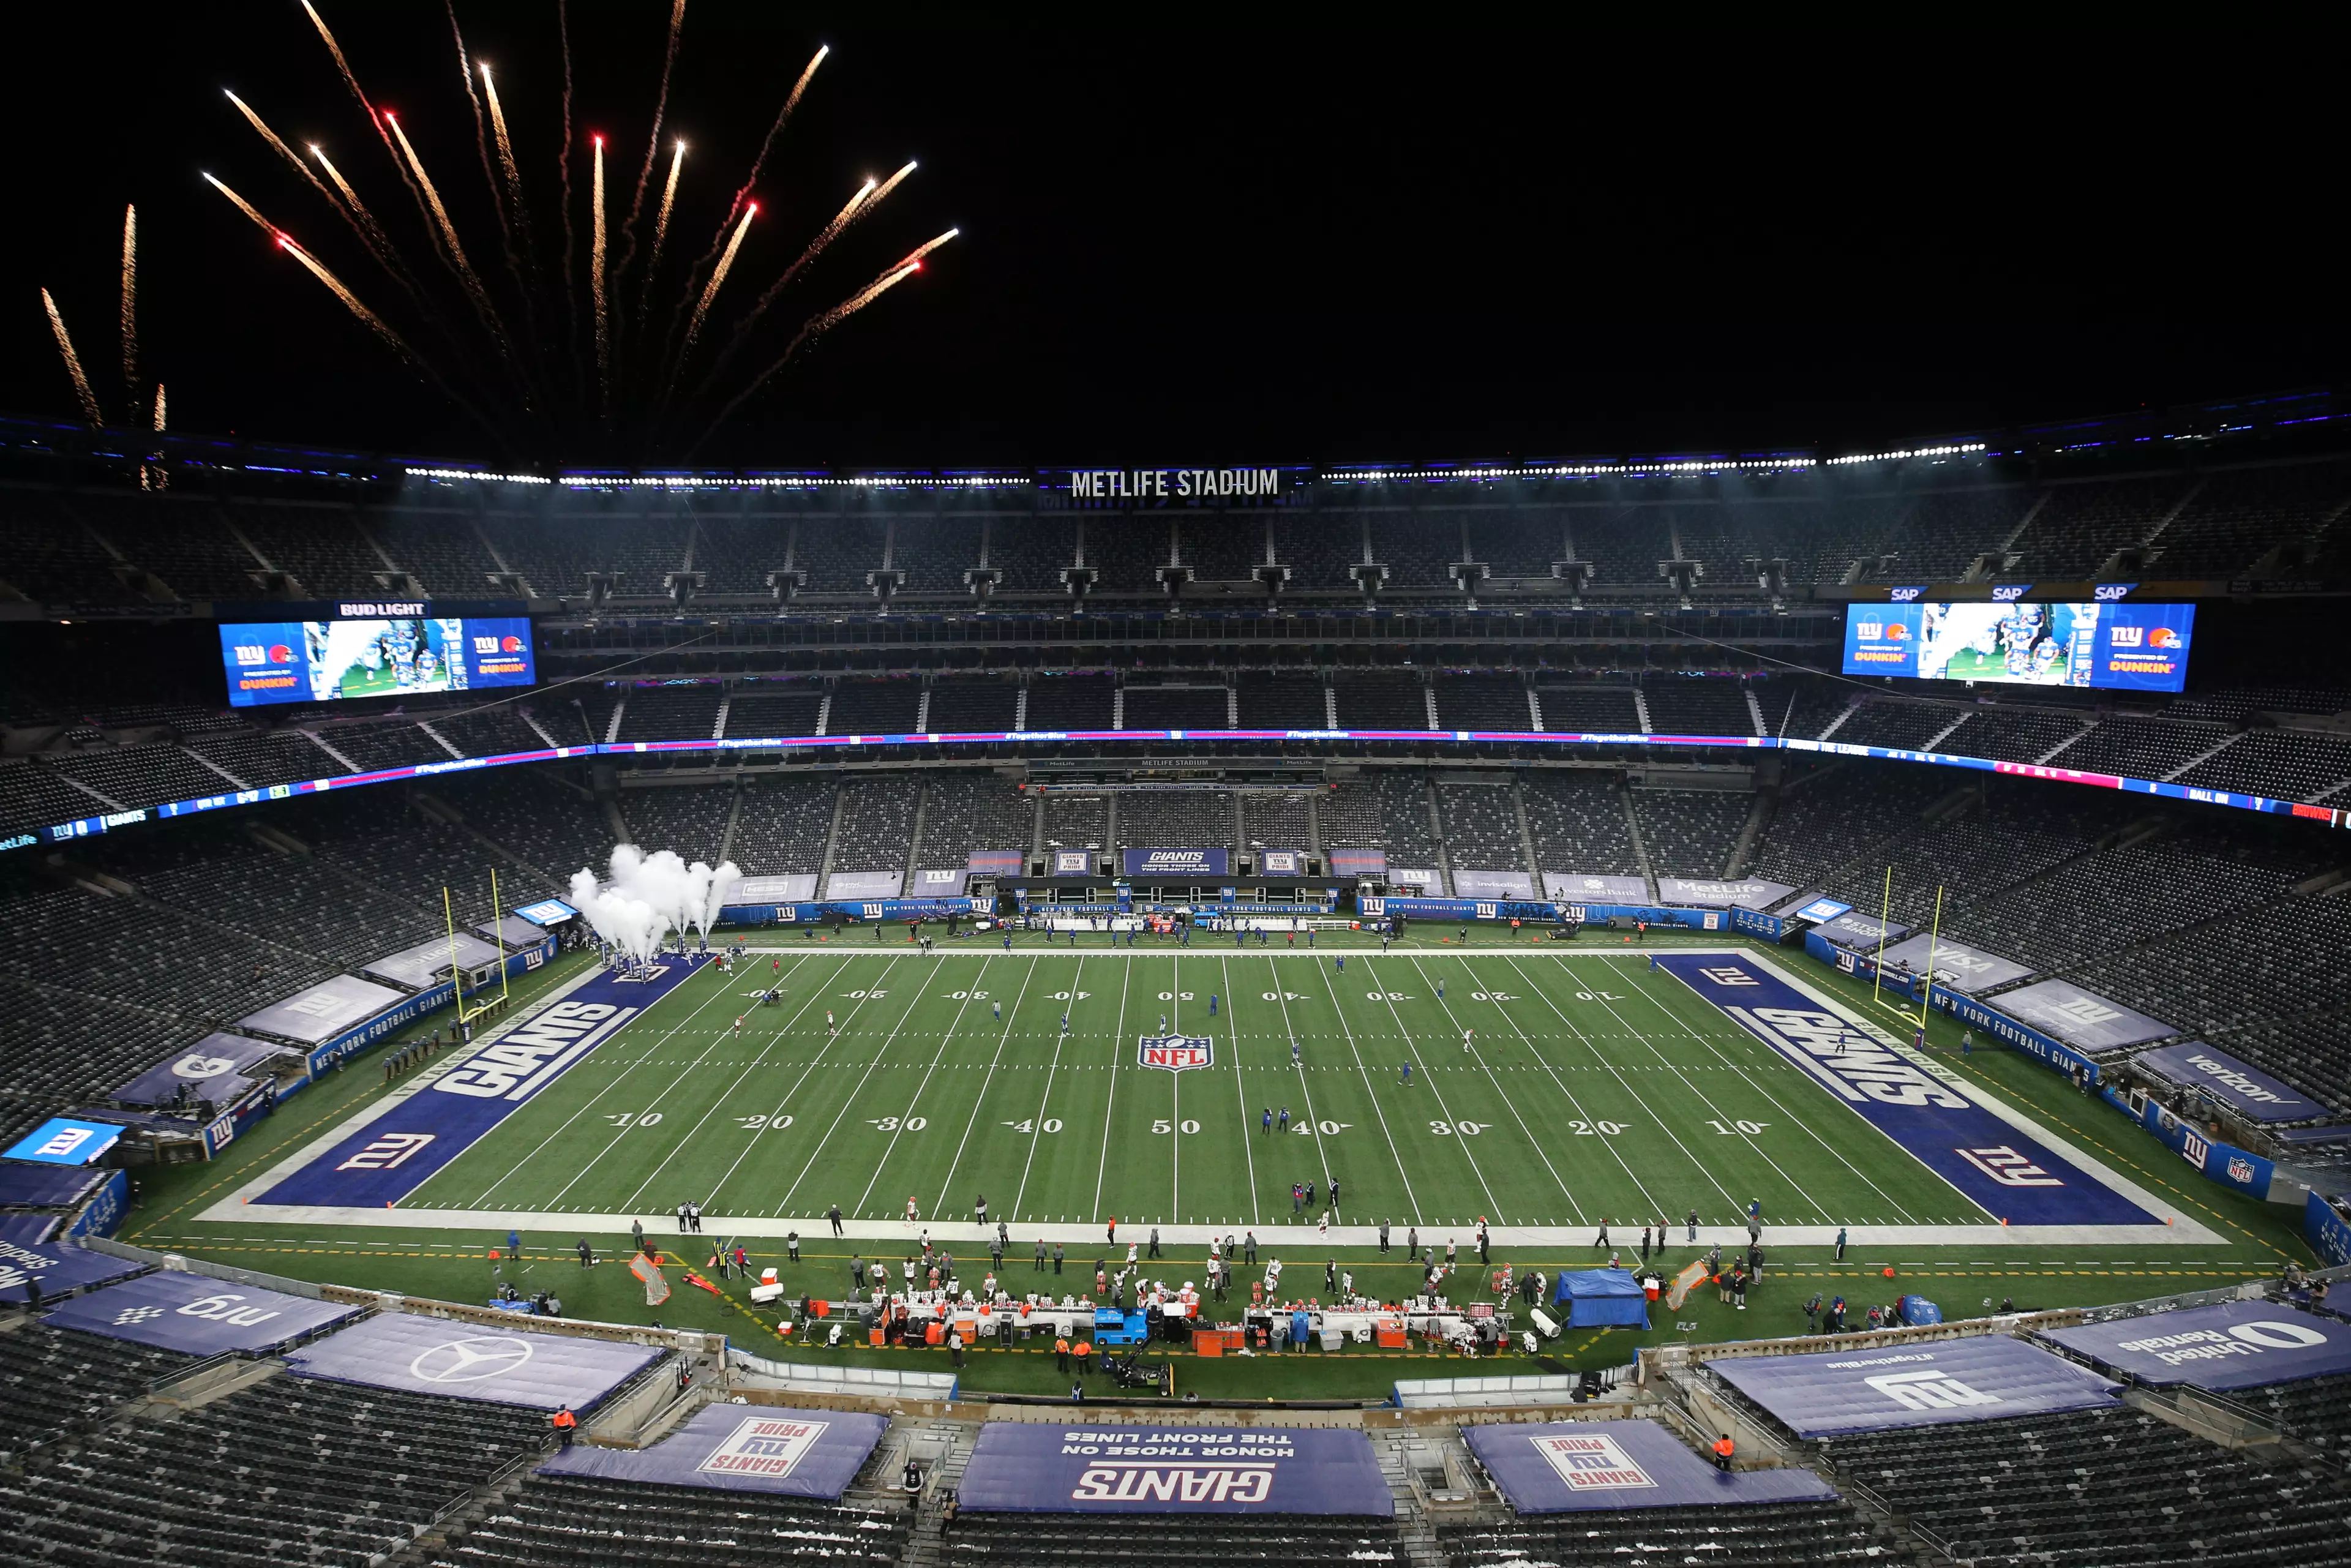 The MetLife Stadium could host the Champions League final. Image: PA Images